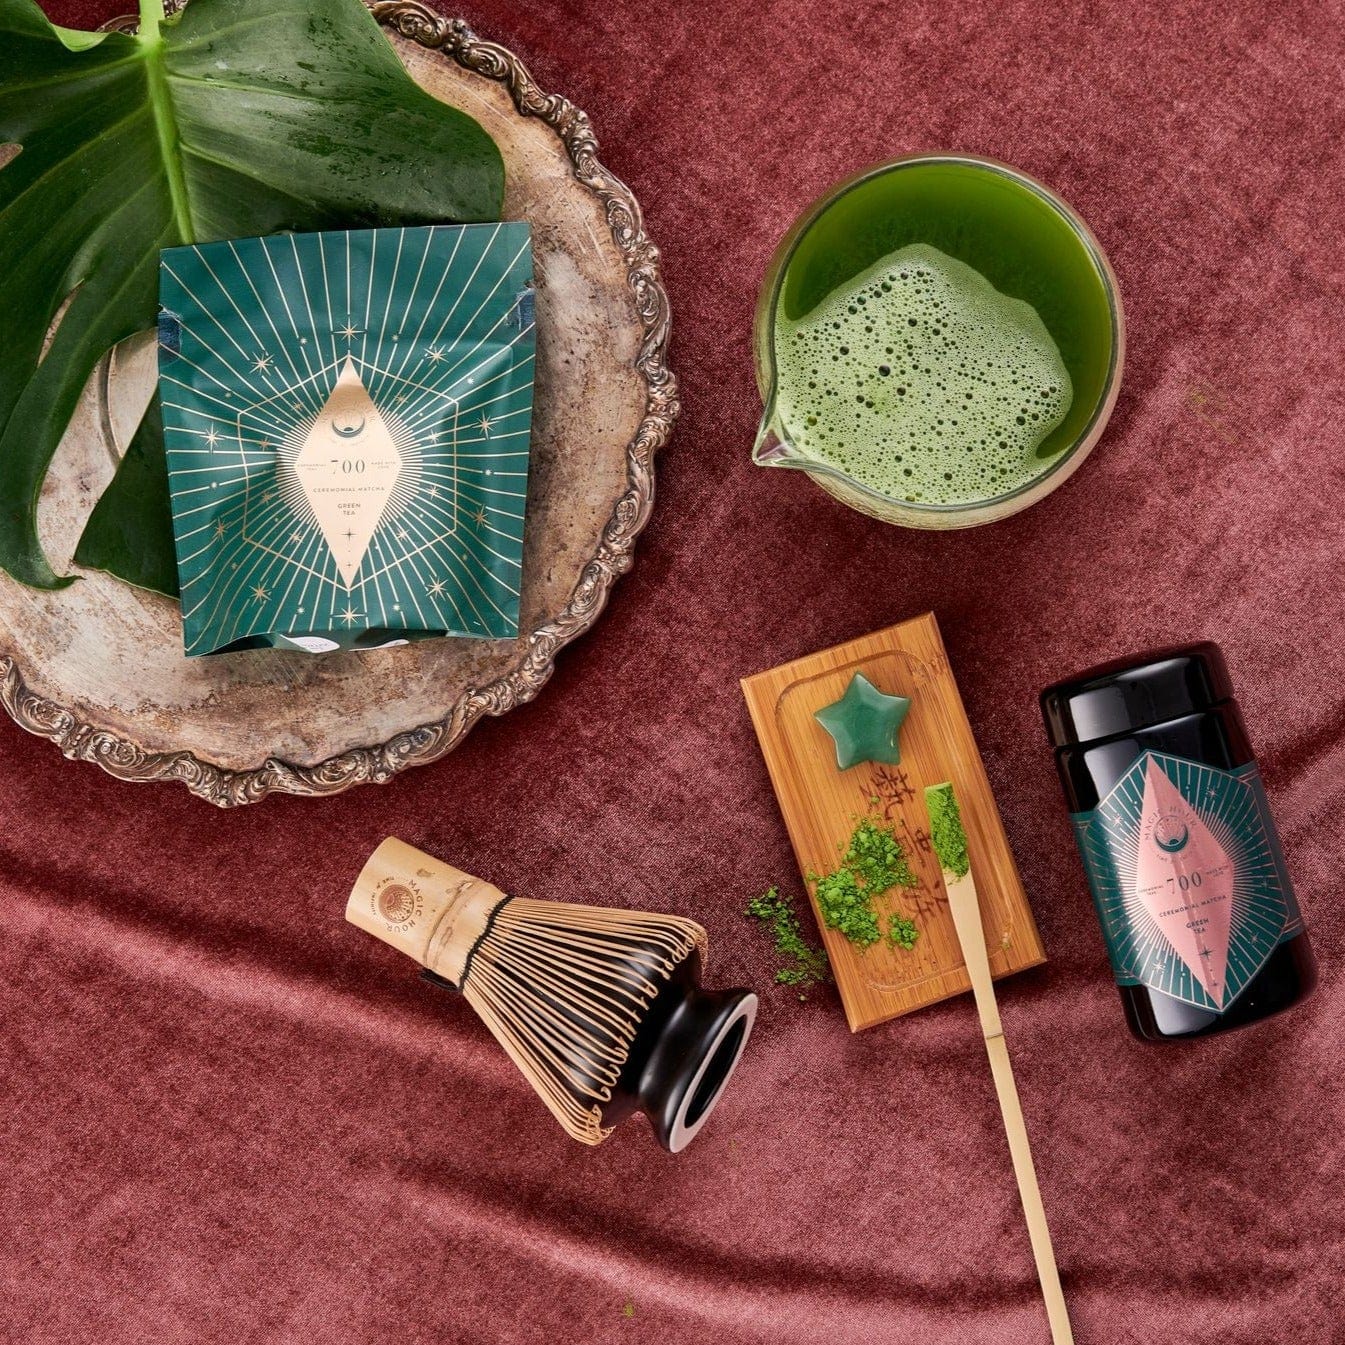 A flat lay image of a traditional matcha tea set, featuring the Chawan Matcha Bowl from Magic Hour. It includes a bamboo whisk, whisk holder, wooden tray with a star-shaped item, silver tray, matcha tea container, and green packaged box filled with loose leaf organic tea.